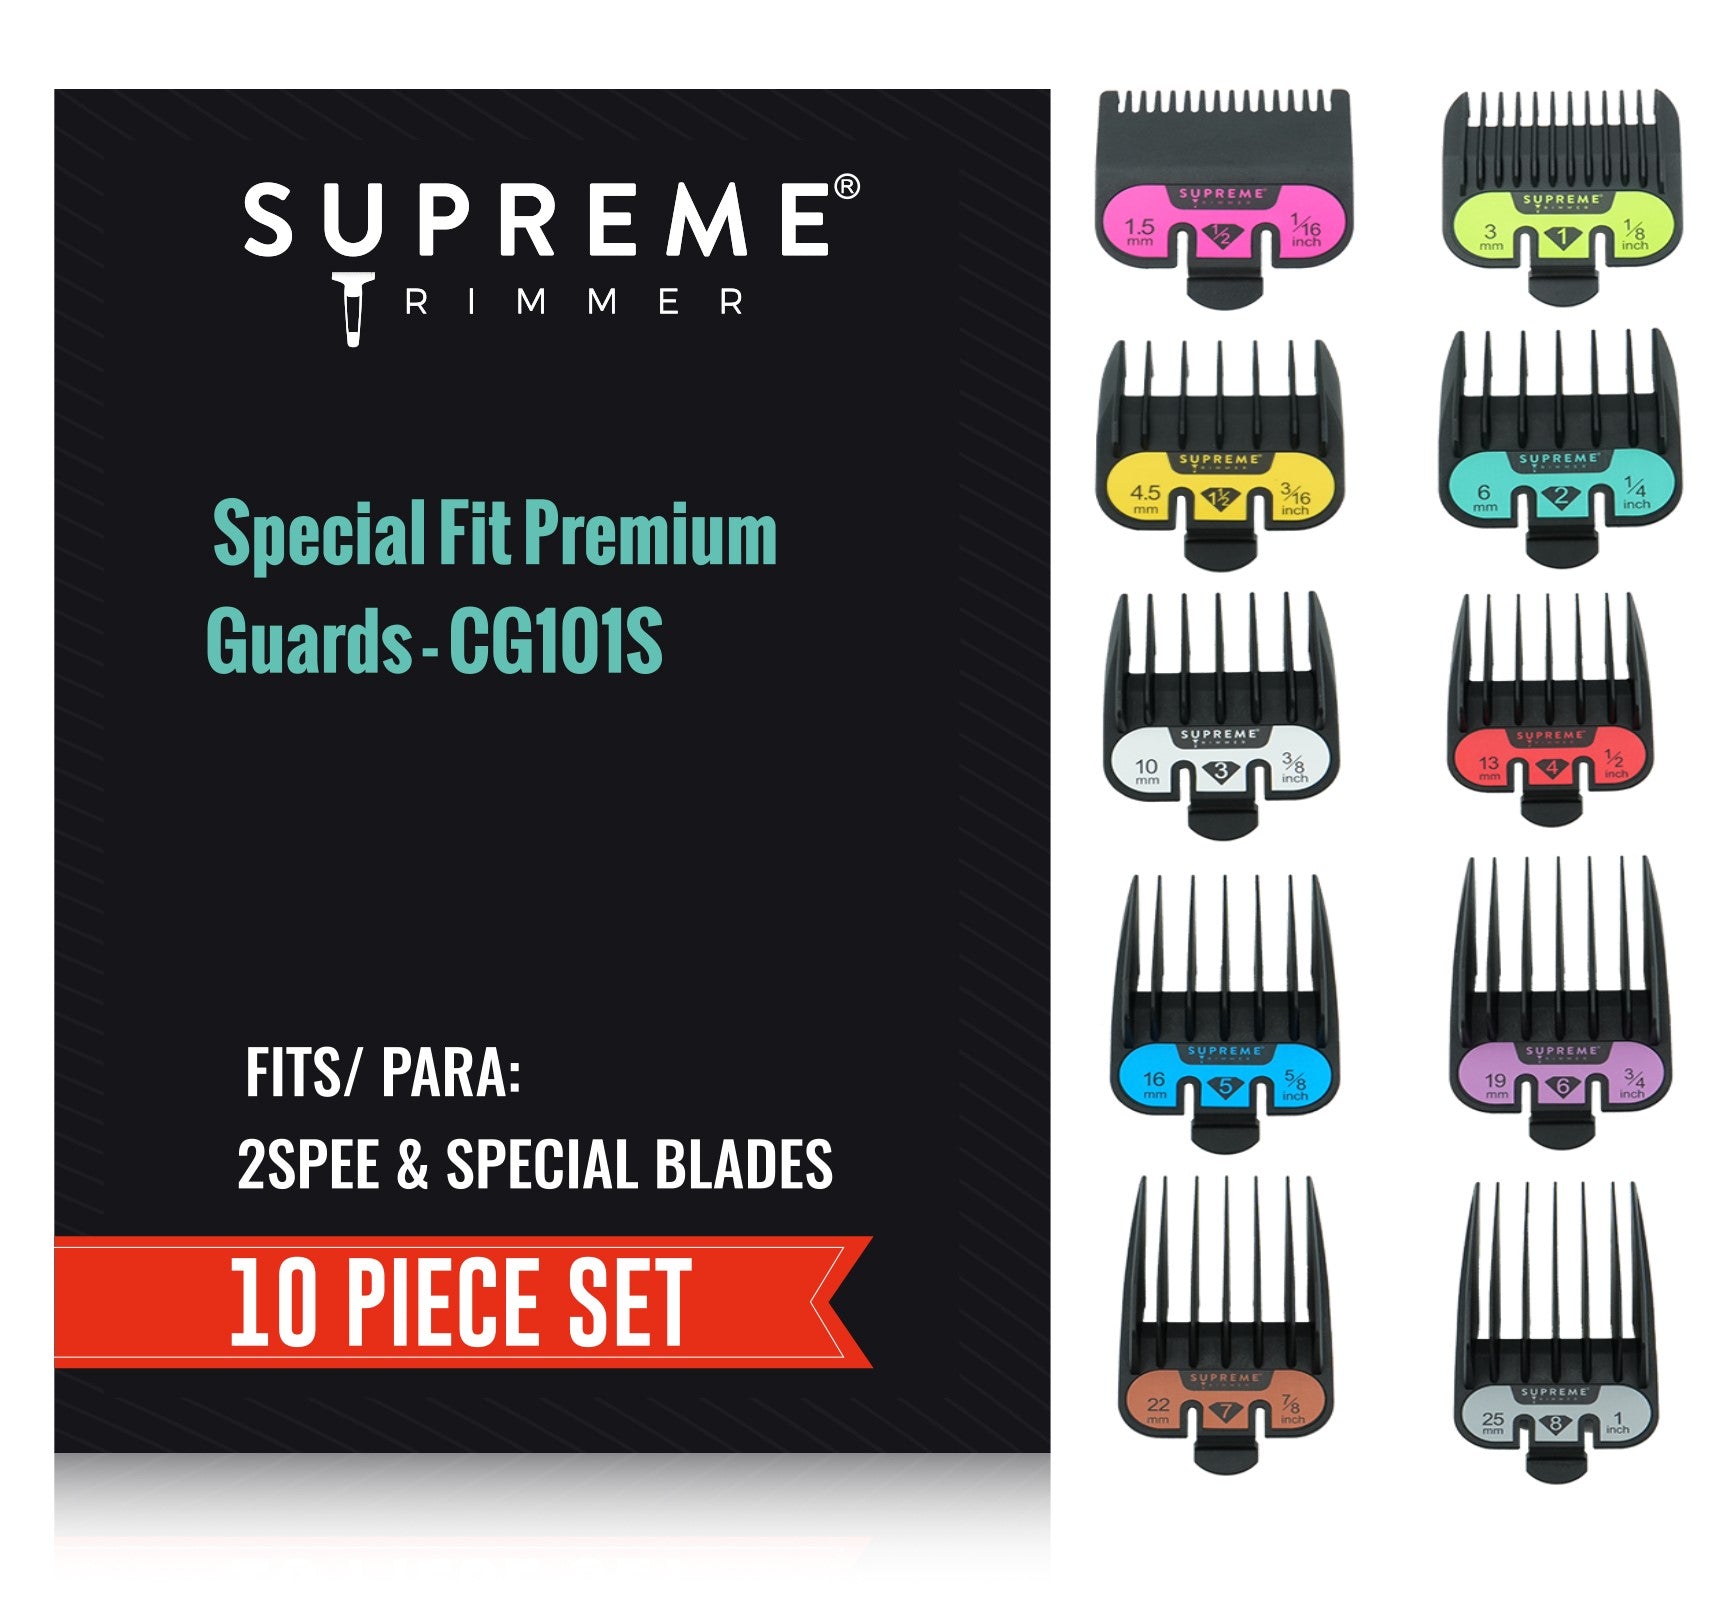 10 special Fit Premium Guards W/Tray CG101S - Clipper guards - Supreme Trimmer Mens Trimmer Grooming kit 